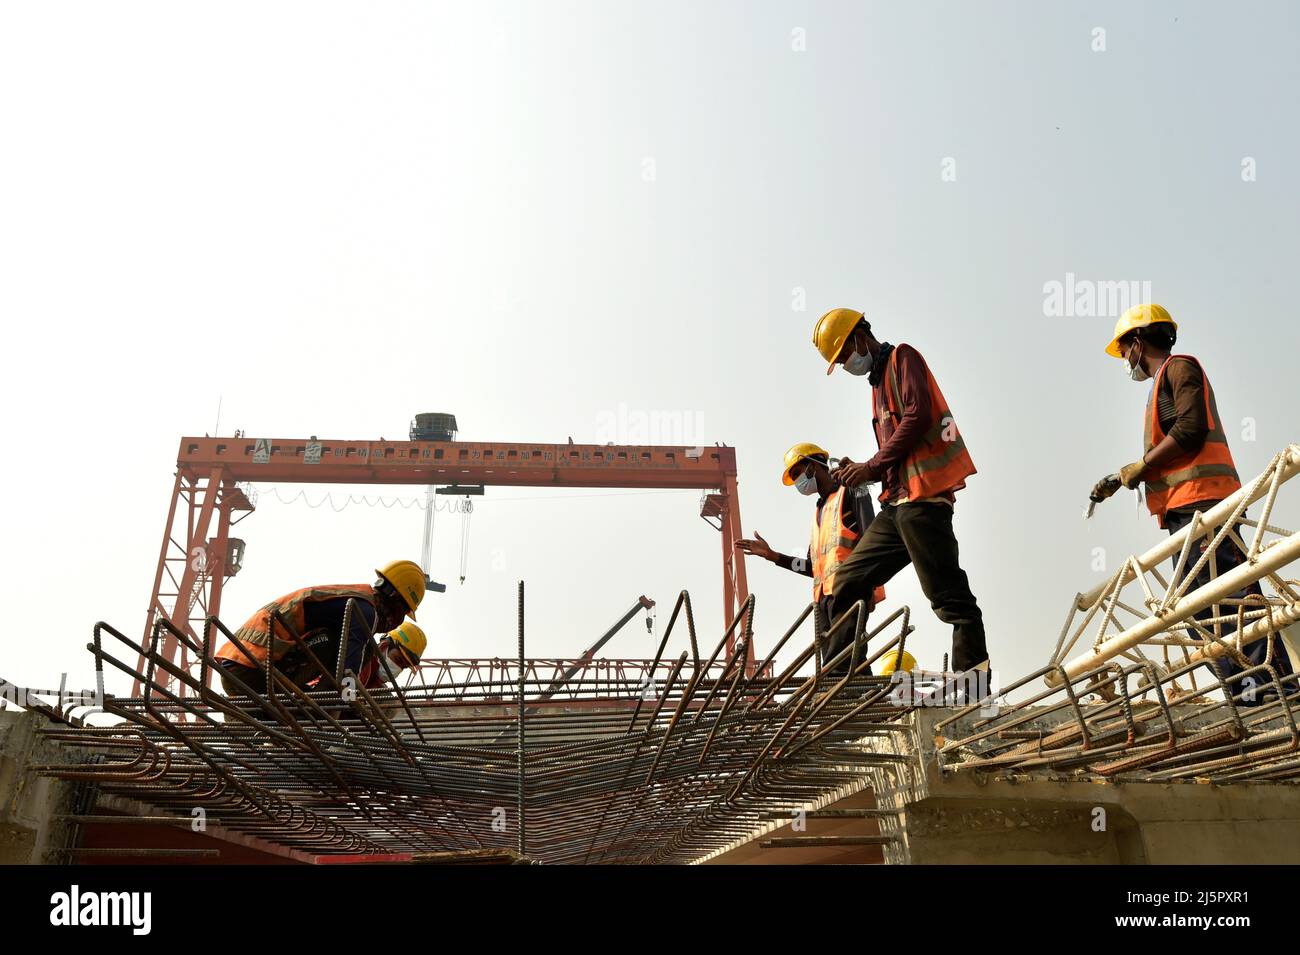 Dhaka. 25th Apr, 2022. Workers tie rebar cages for the First Dhaka Elevated Expressway (FDEE) in Dhaka, Bangladesh, March 17, 2022. TO GO WITH 'Feature: Fast and safe, Sino-Bangladeshi expressway joint venture sees clear road ahead' Credit: Xinhua/Alamy Live News Stock Photo